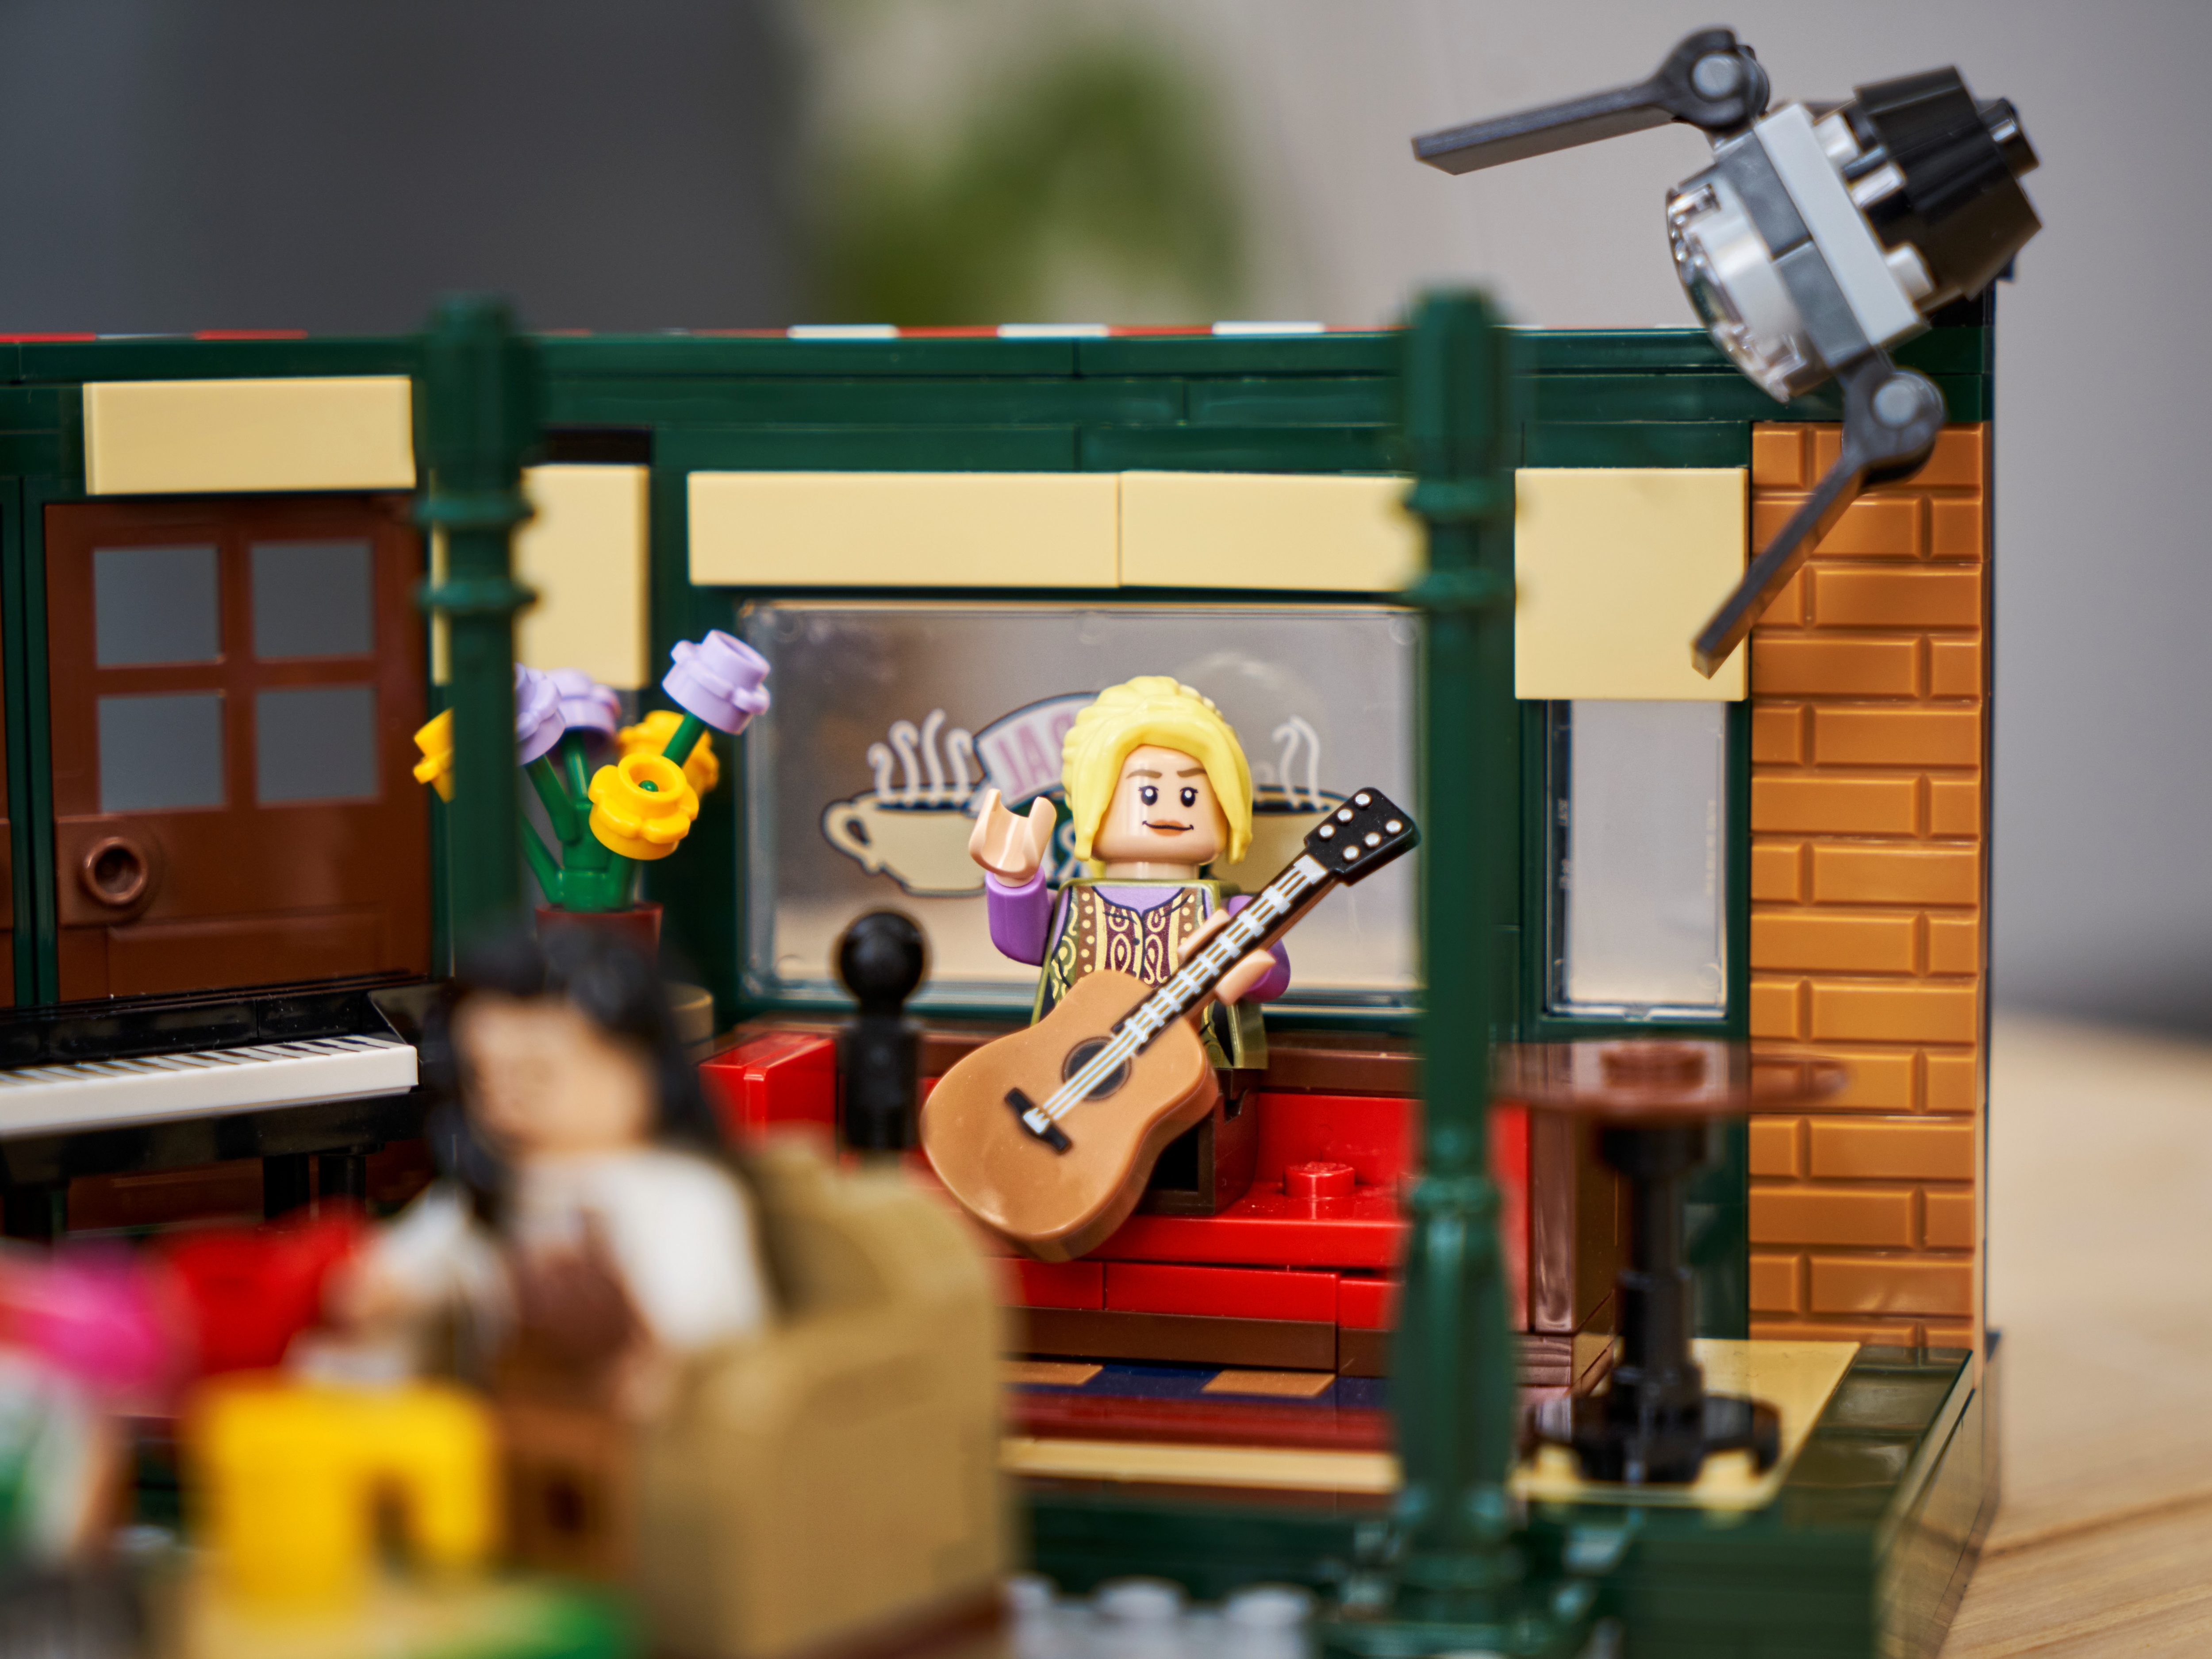 PIVOT! Brand-New 'Friends' LEGO Central Perk Set Comes Out Today! - GeekDad